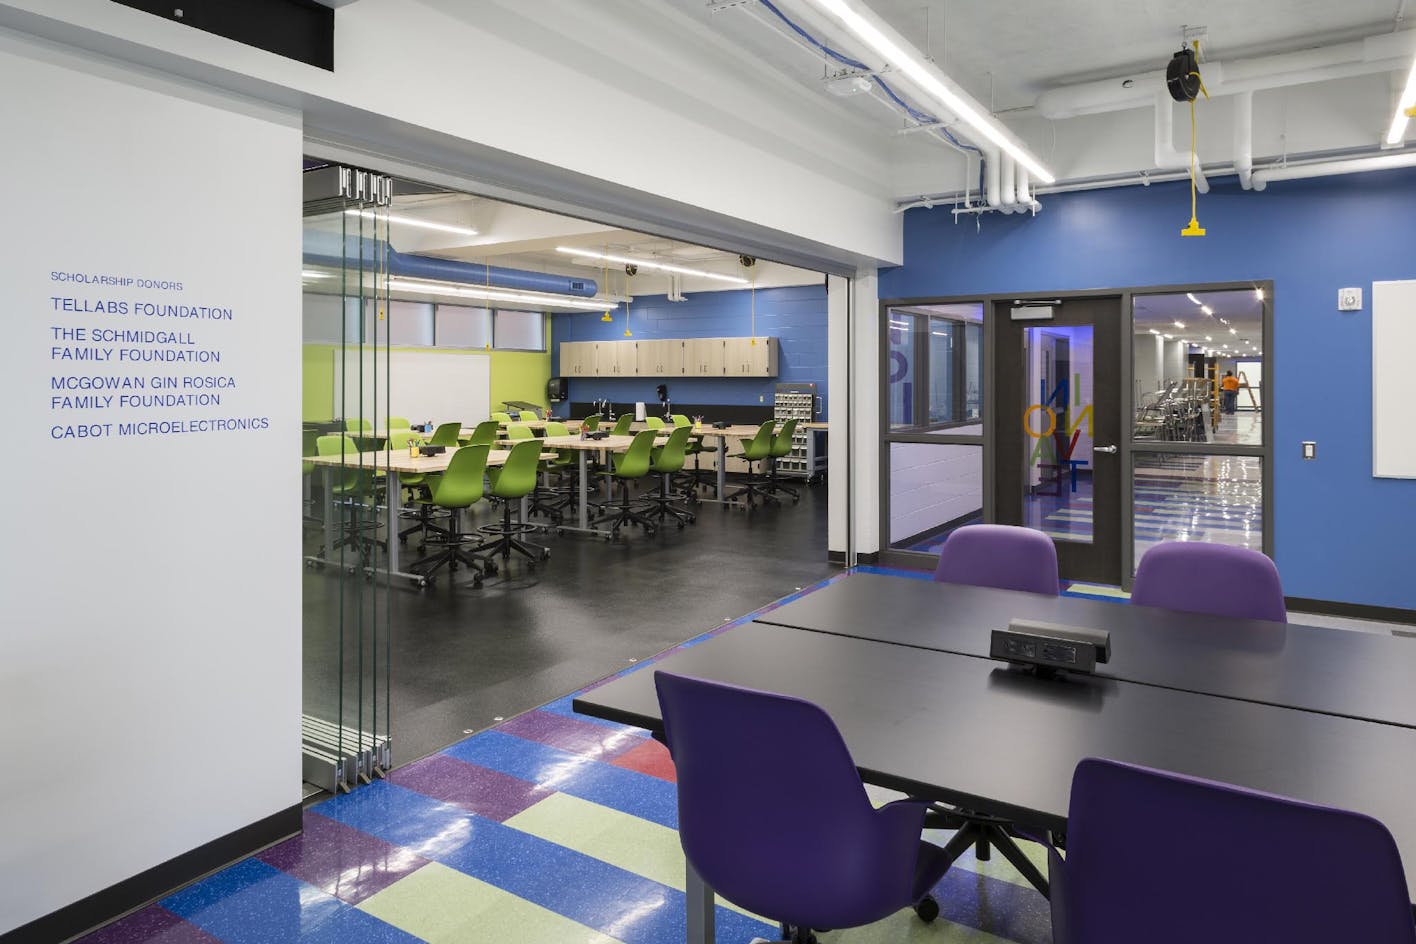 Sound control interior frameless glass wall systems between classrooms